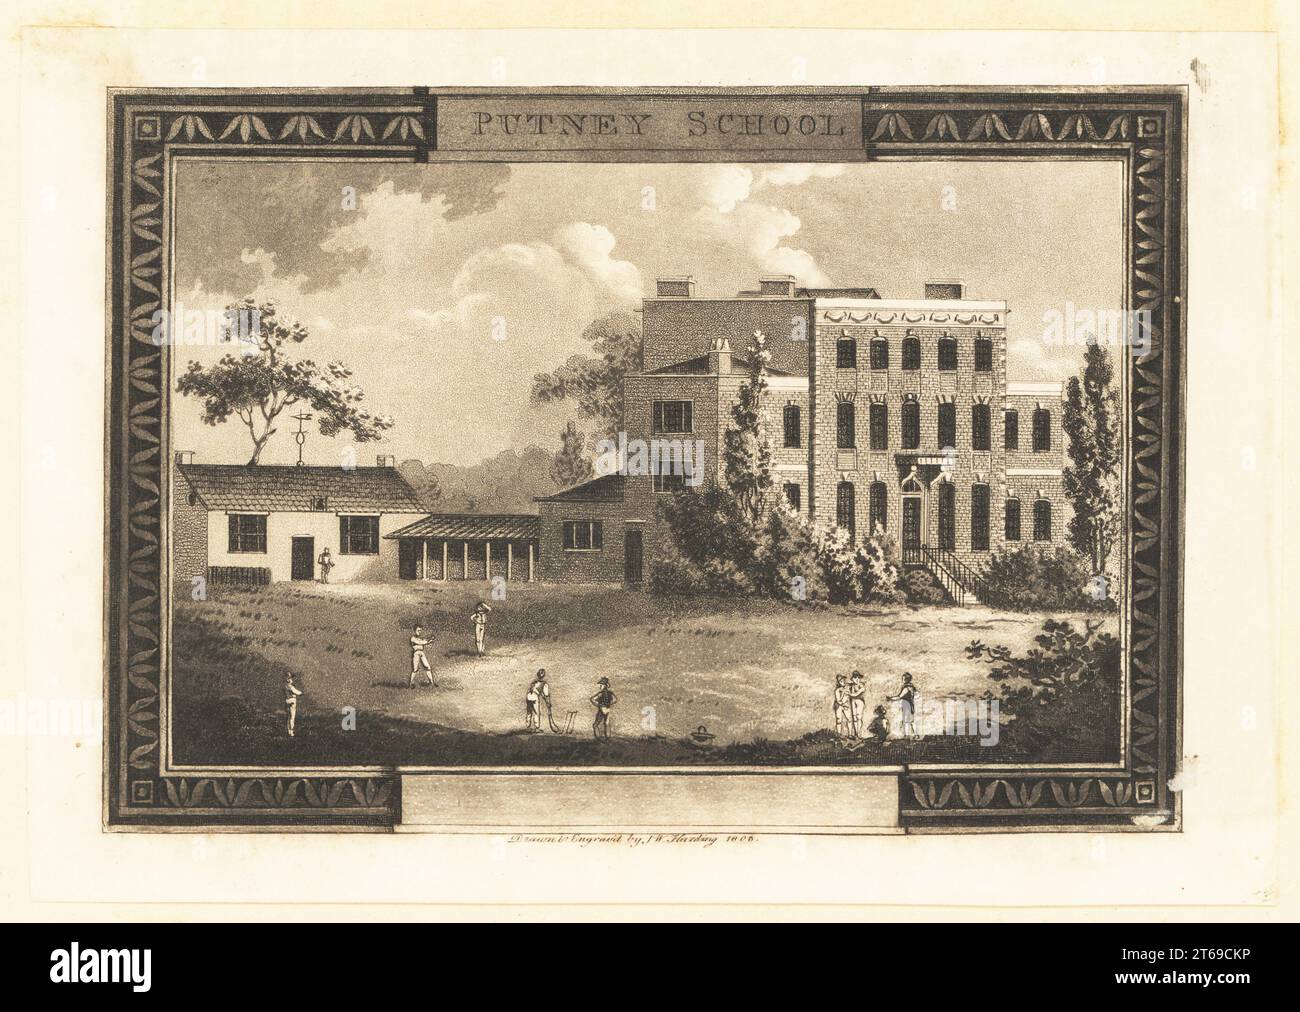 View of Putney School or Putney House, Richmond Road, London, 1806. For many years it was used as a school and Hospital for Incurables, and residents can be seen playing cricket in the gardens. Originally a country residence of the Duke of Hamilton. Copperplate engraving drawn and engraved by J.W. Harding, London, 1806. Stock Photo